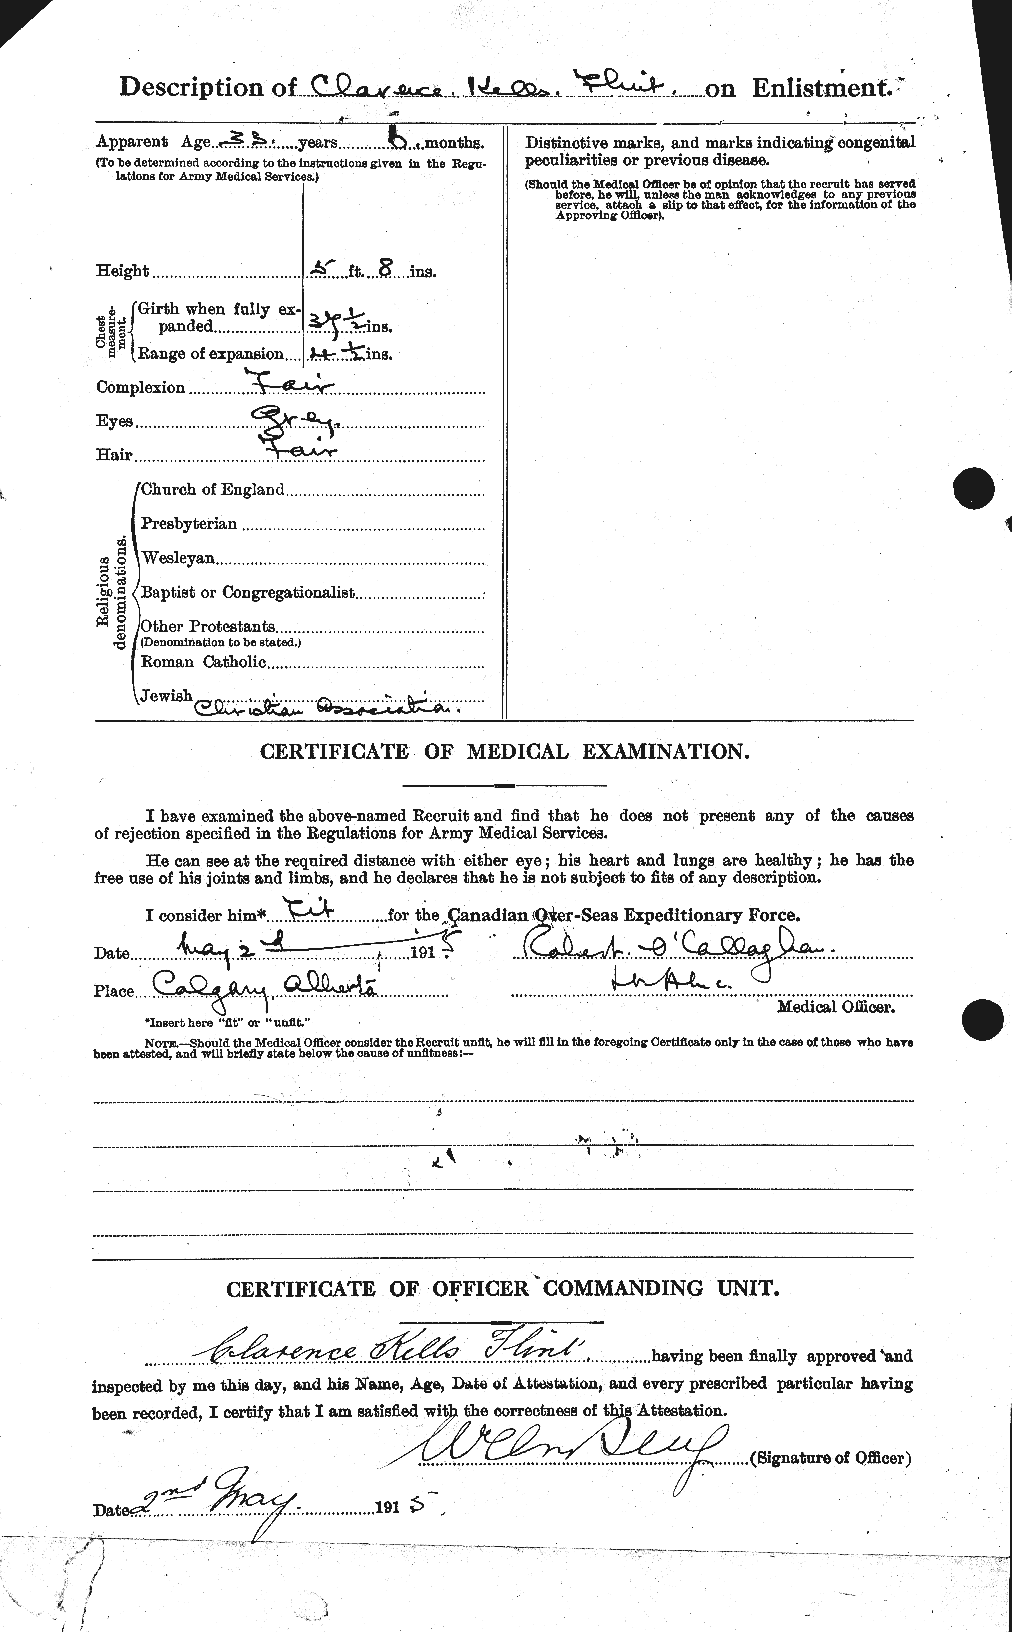 Personnel Records of the First World War - CEF 331167b